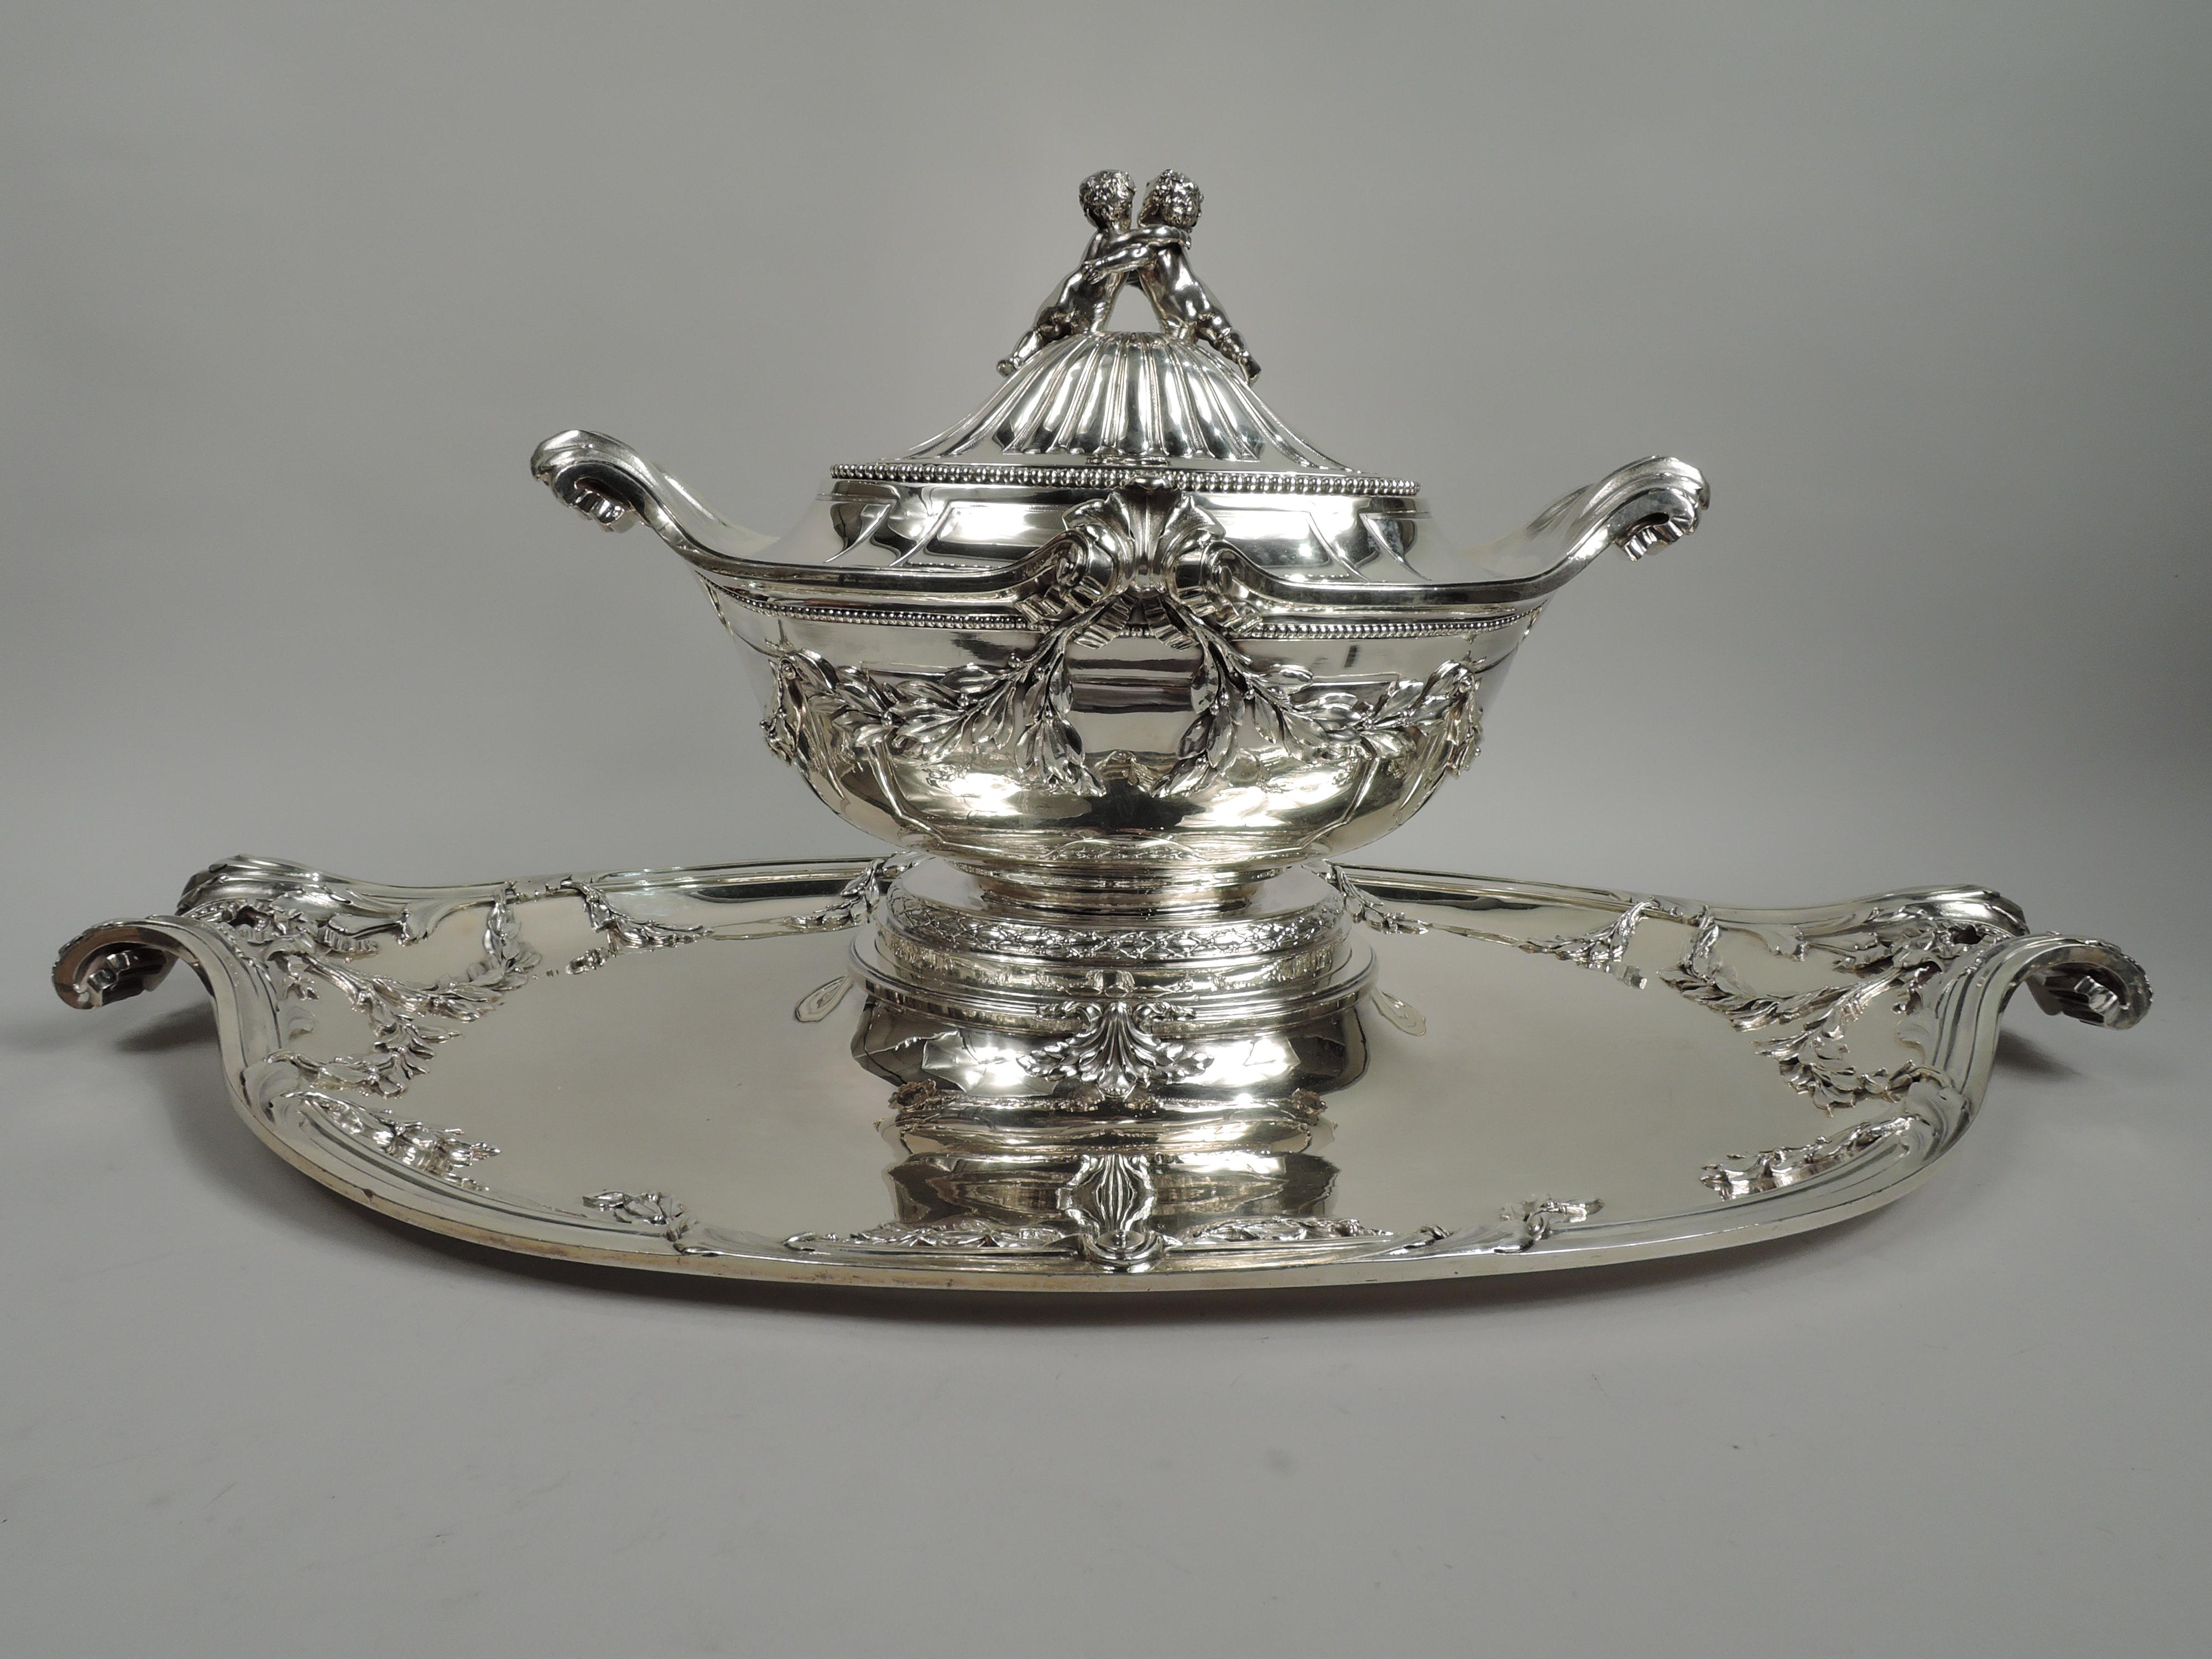 Belle Epoque Rococo soup tureen on stand. Made by Tetard Frères in Paris, ca 1910. Ovoid bowl with tapering sides and curved bottom with fluted and turned-down leaf handles. Sides have projecting volute scrolls inset with leaves. Leaves stippled and